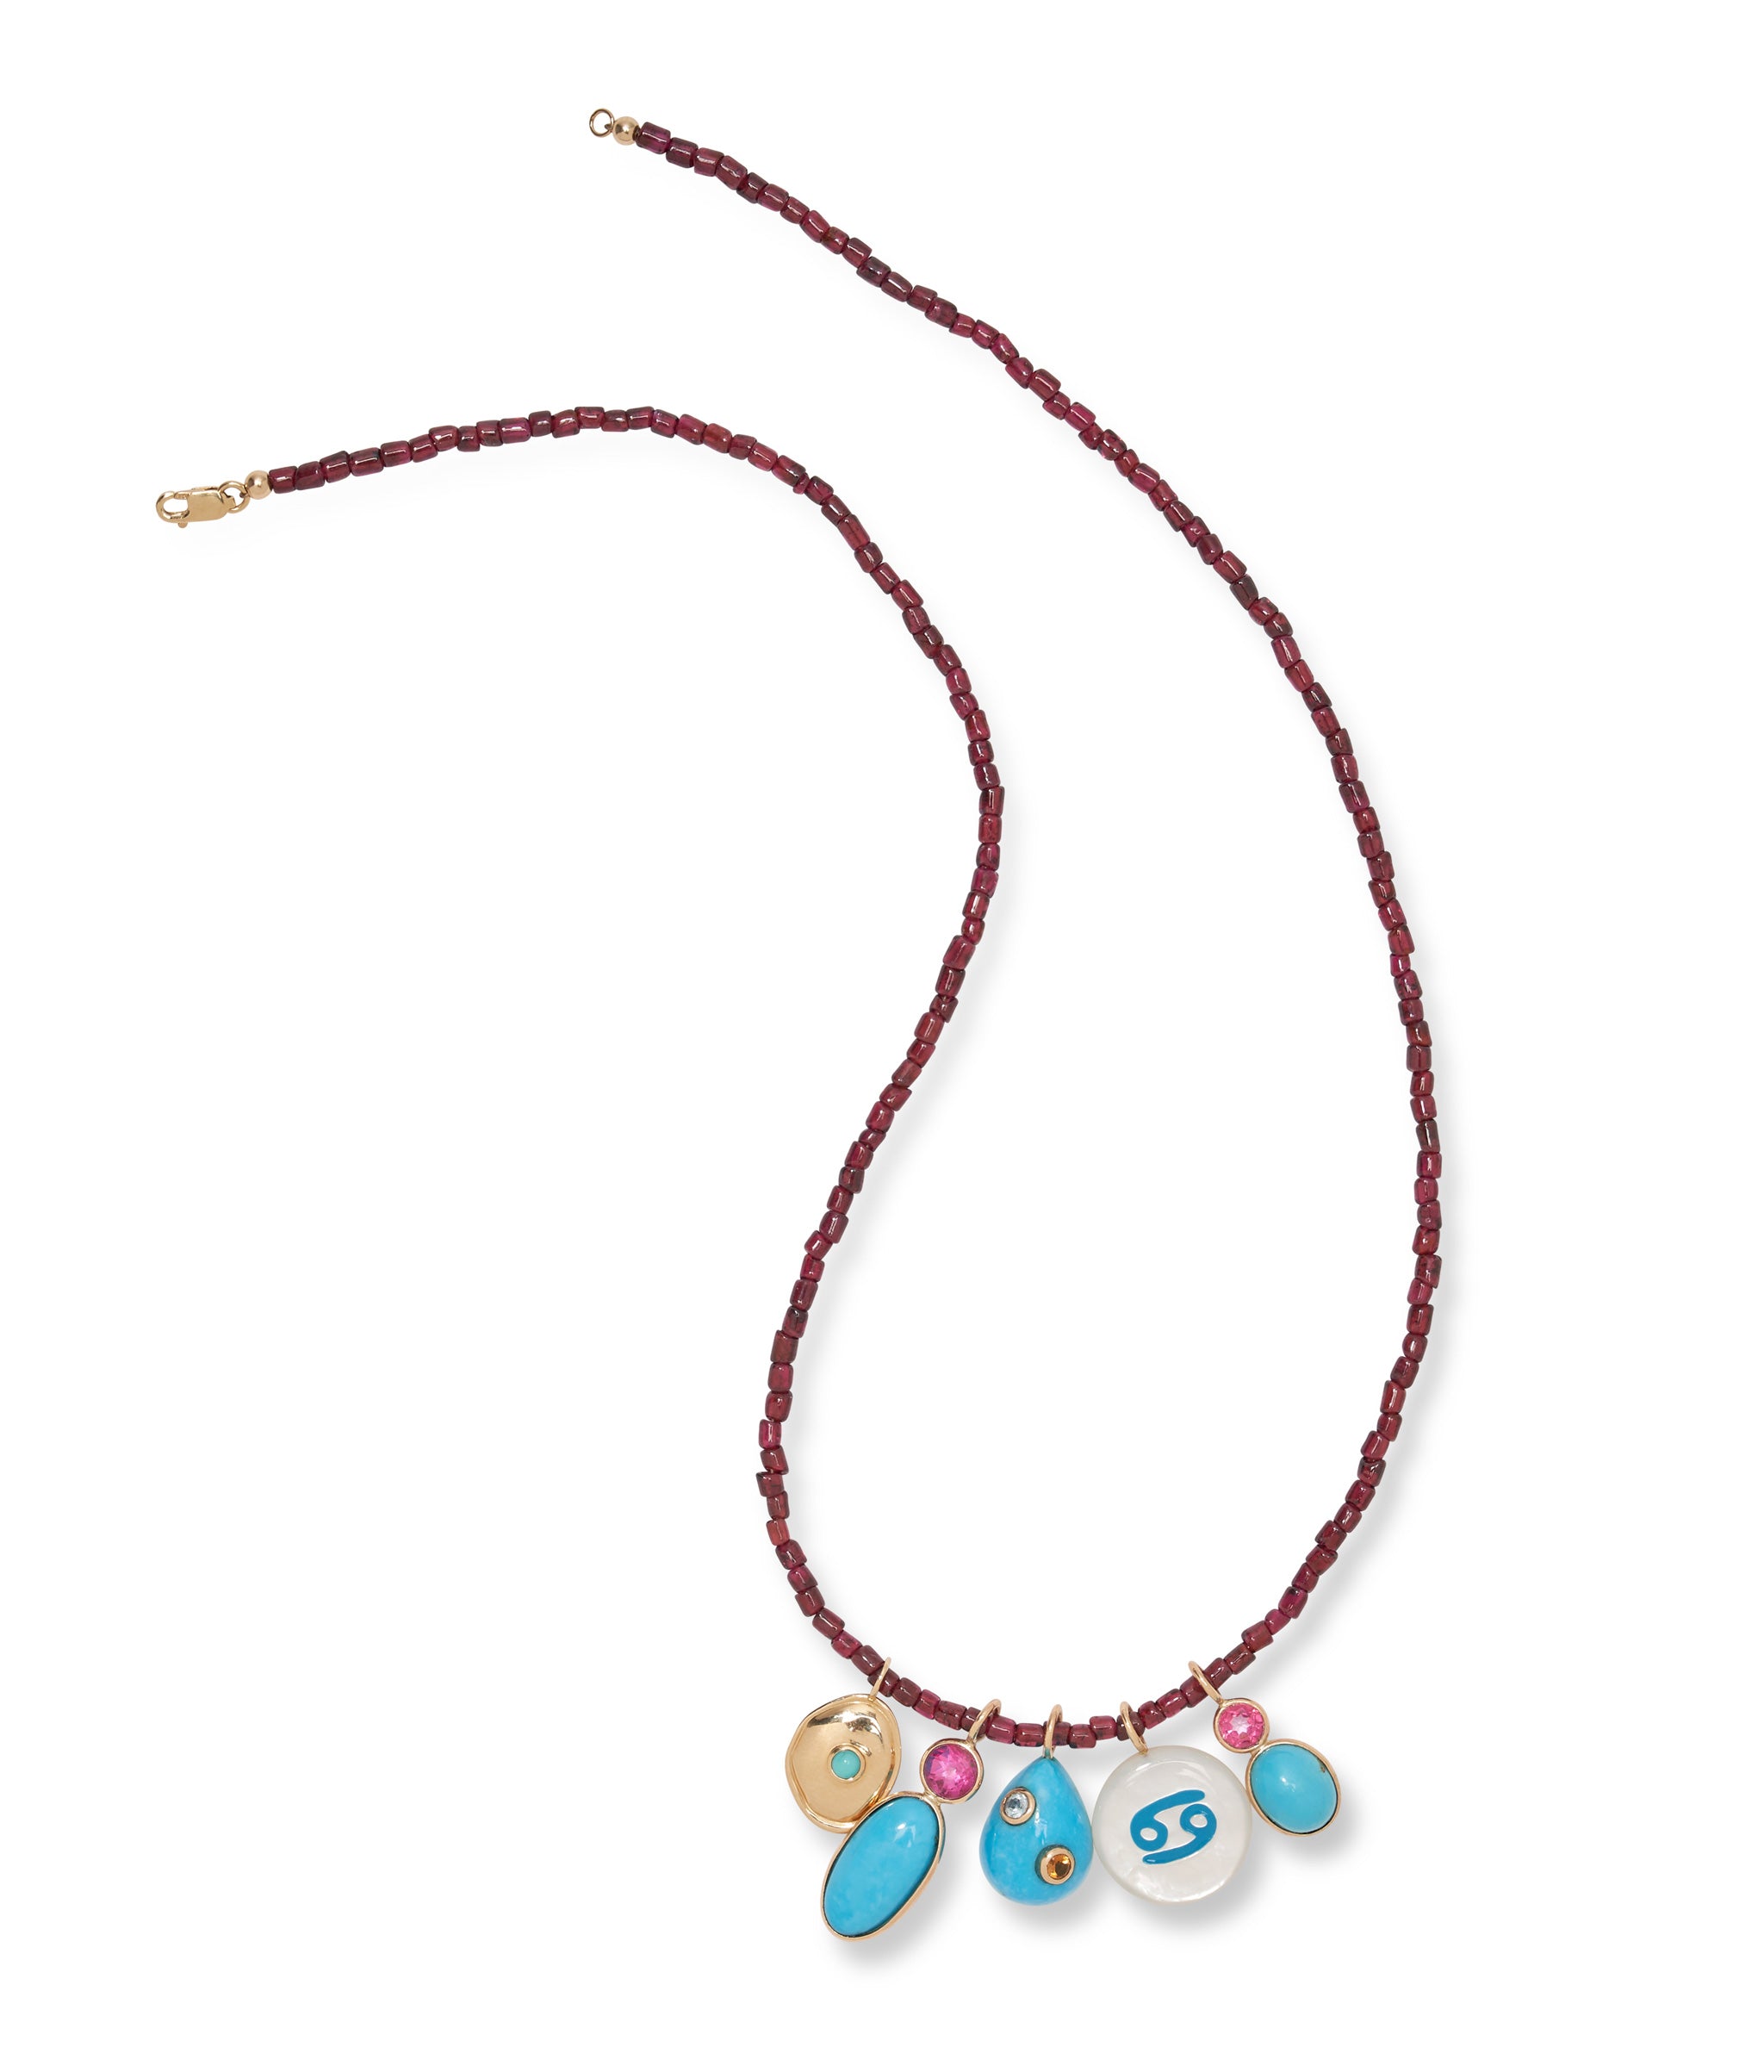 Oval 14k Gold Necklace Charm in Pink Topaz & Turquoise